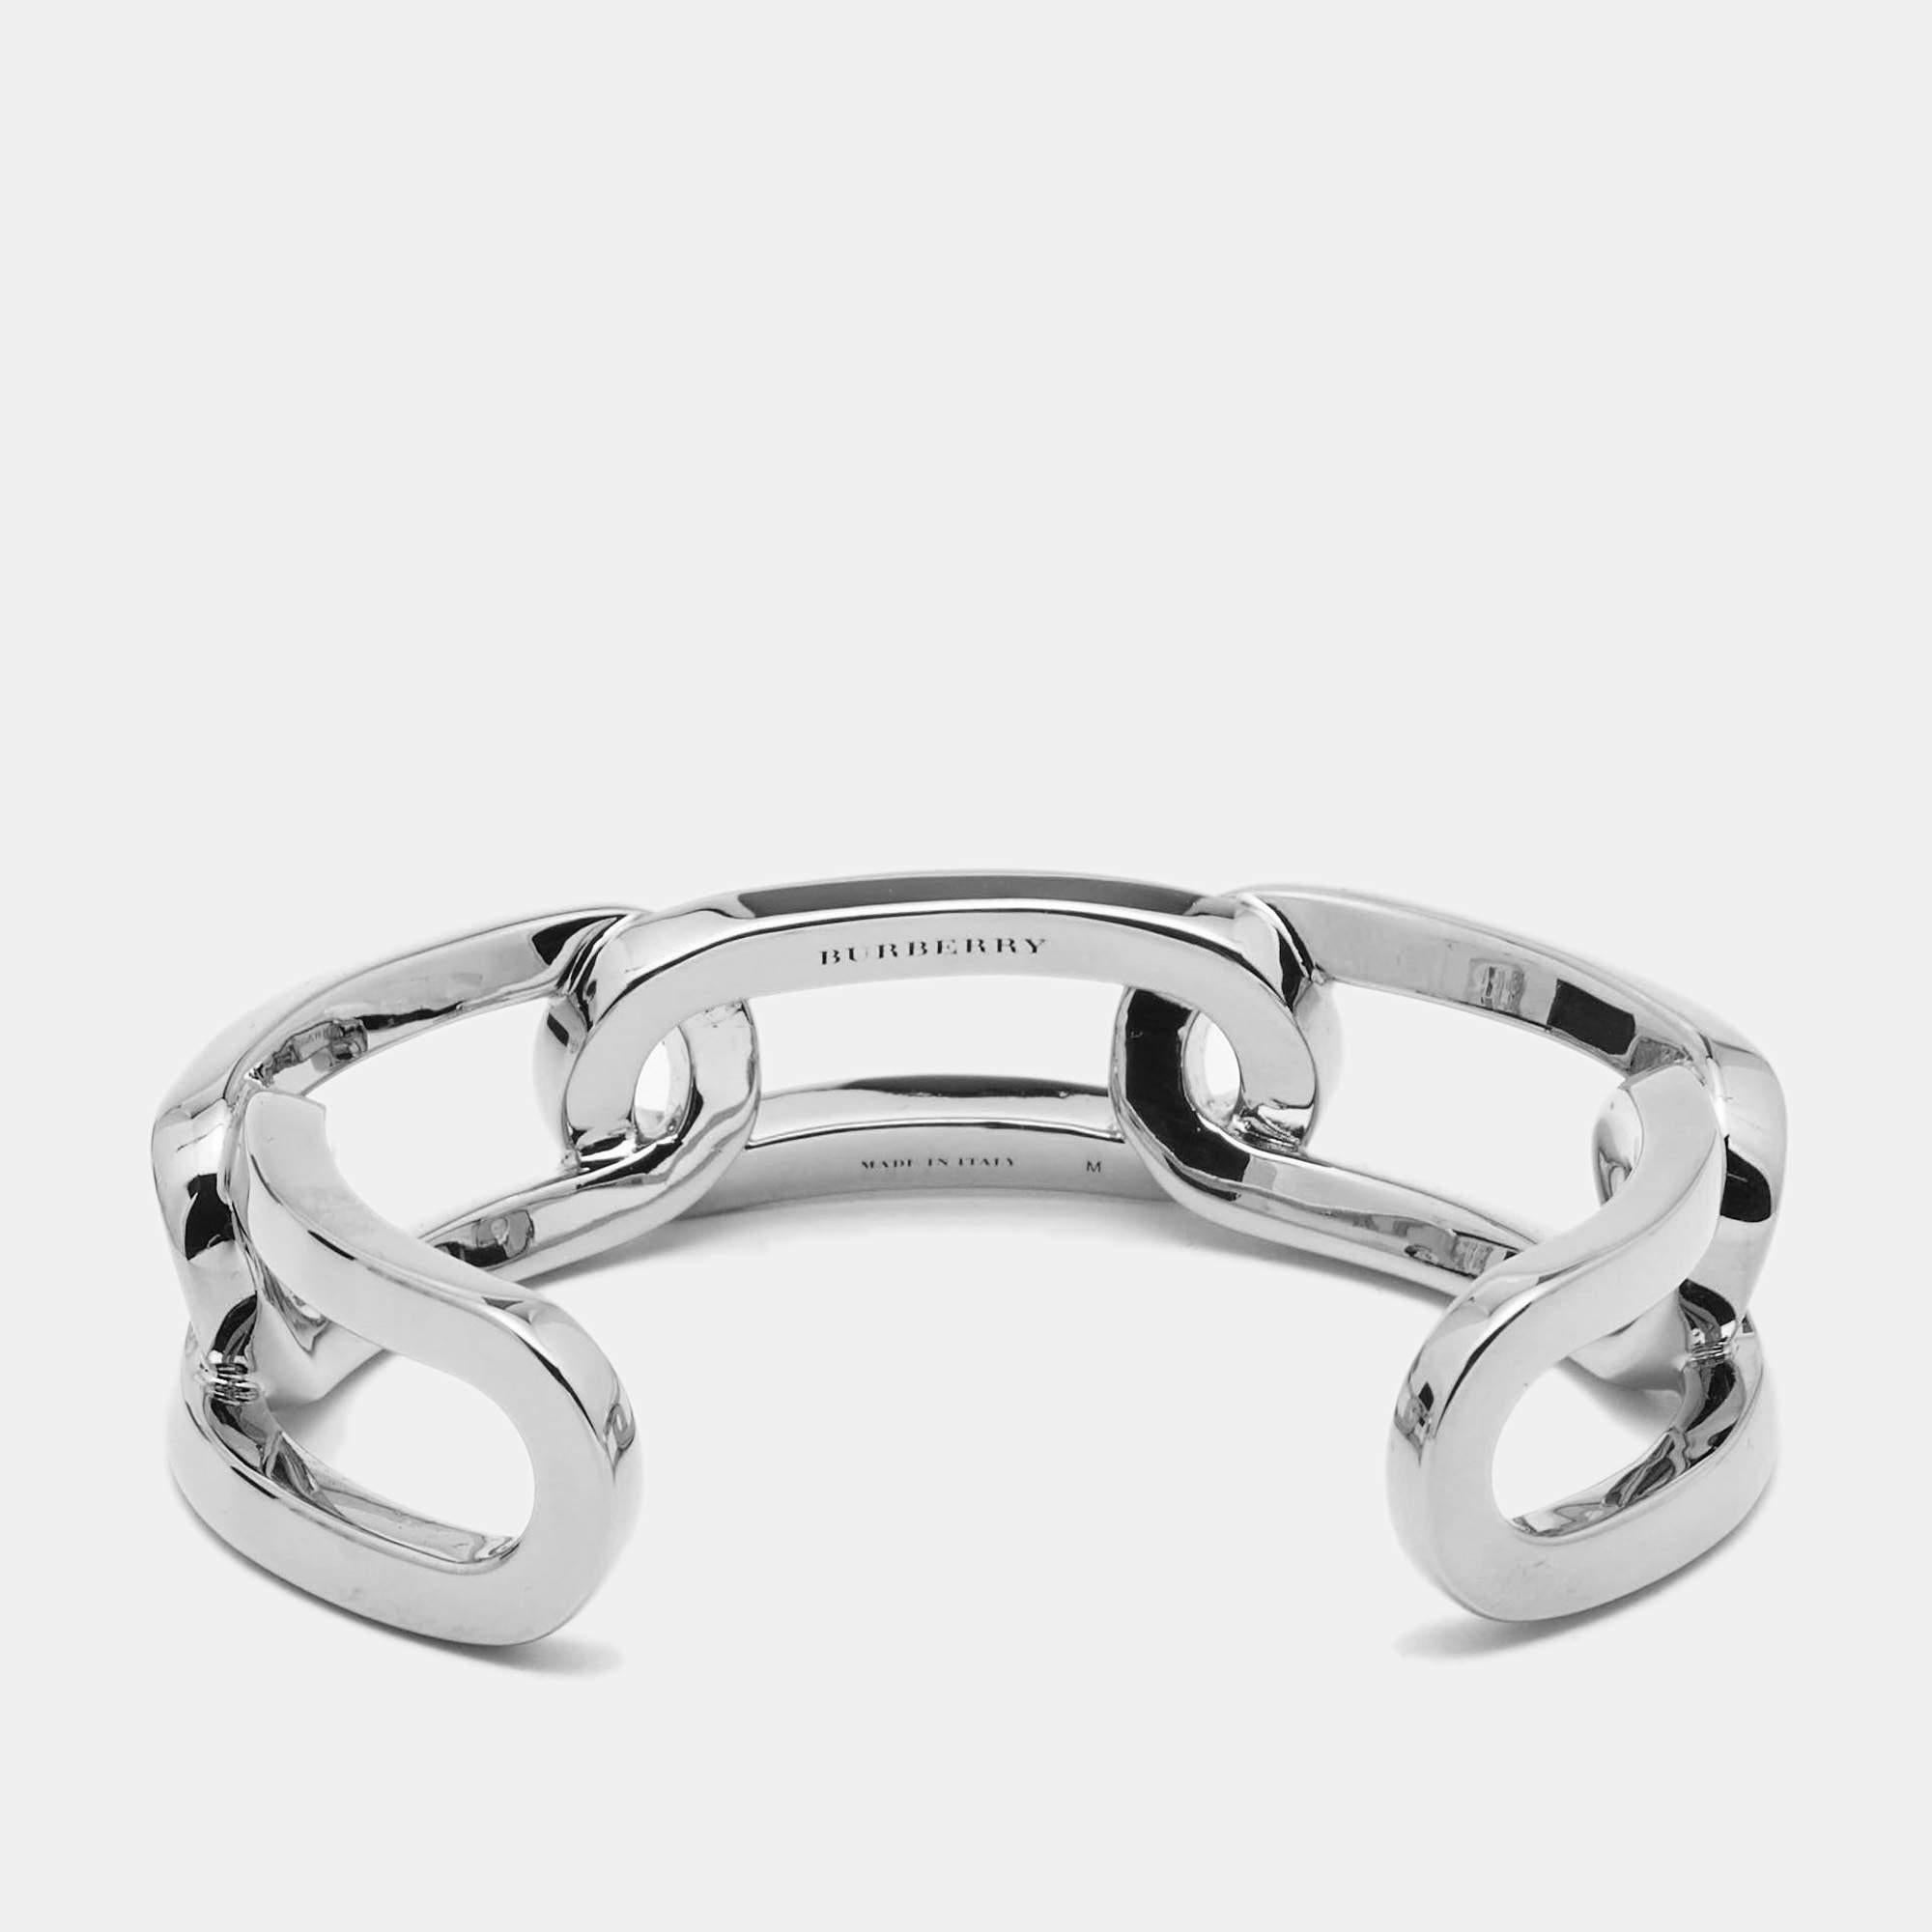 For the woman who is ready to ace every accessory game, Burberry brings her this fabulous open cuff bracelet made from silver-tone metal into a chainlink silhouette. The bracelet has a simple style with smooth edges and hallmark